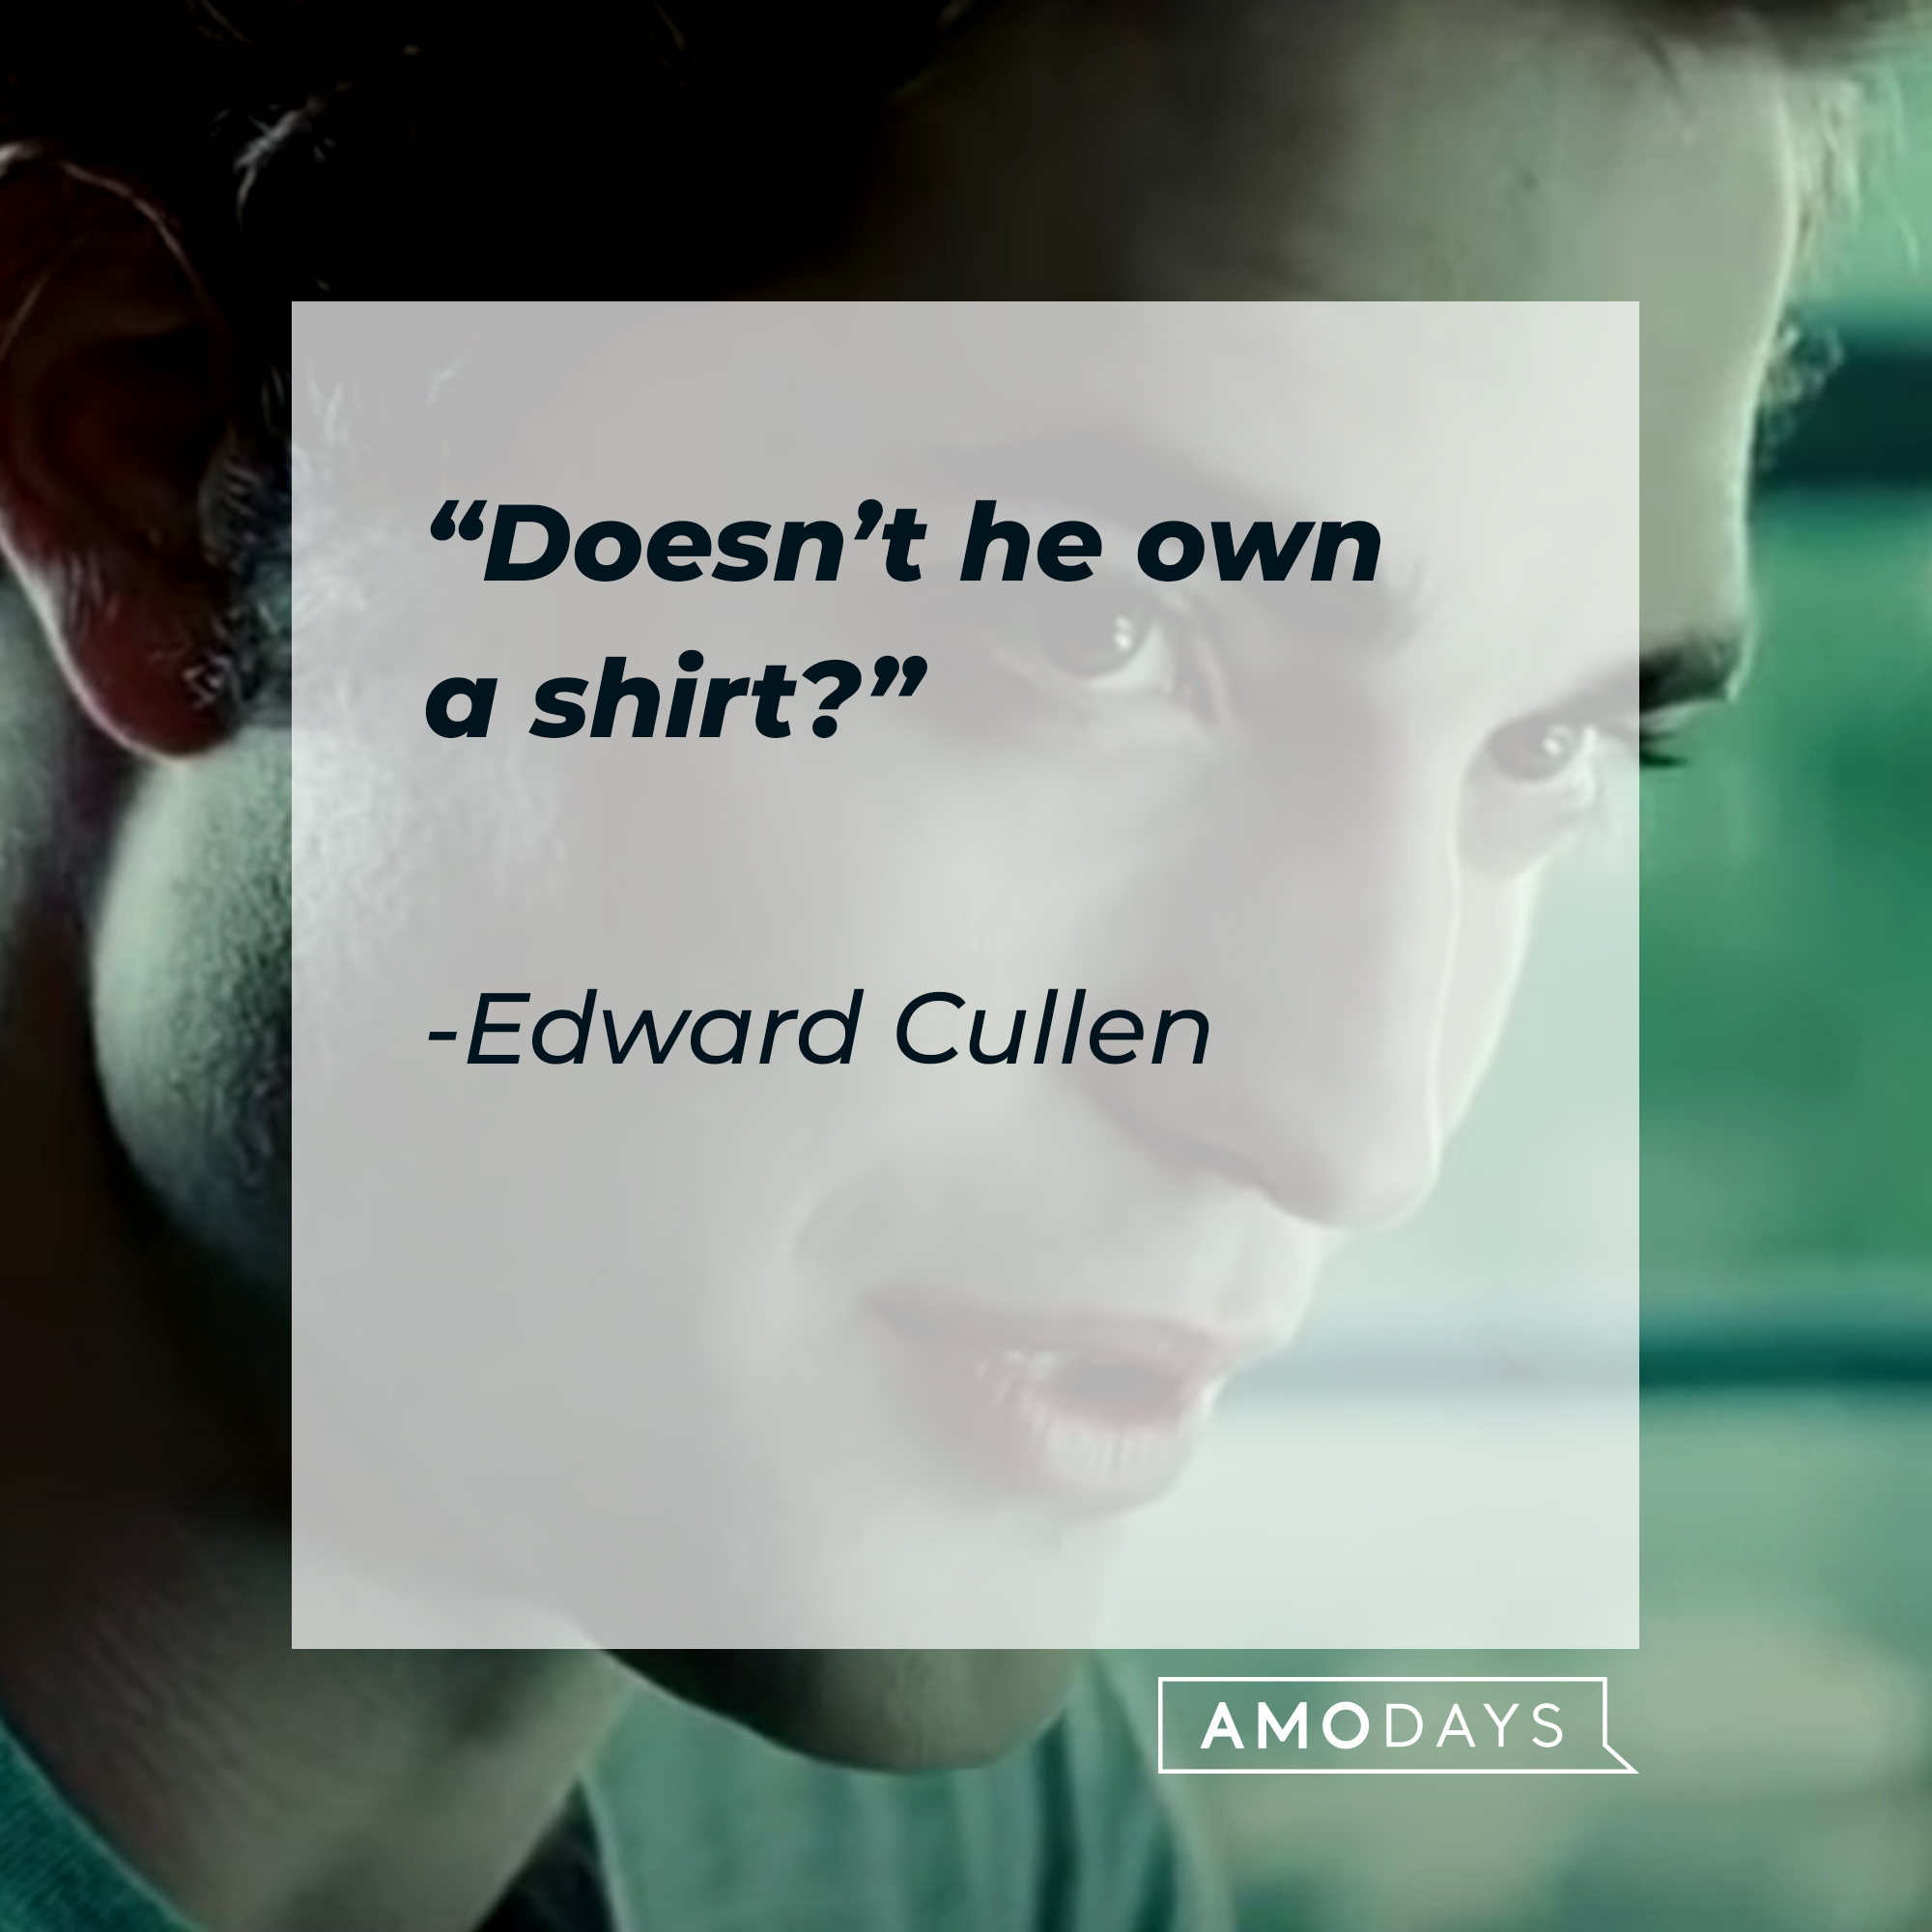 Edward Cullen's quote: “Doesn’t he own a shirt?” | Source: facebook.com/twilight